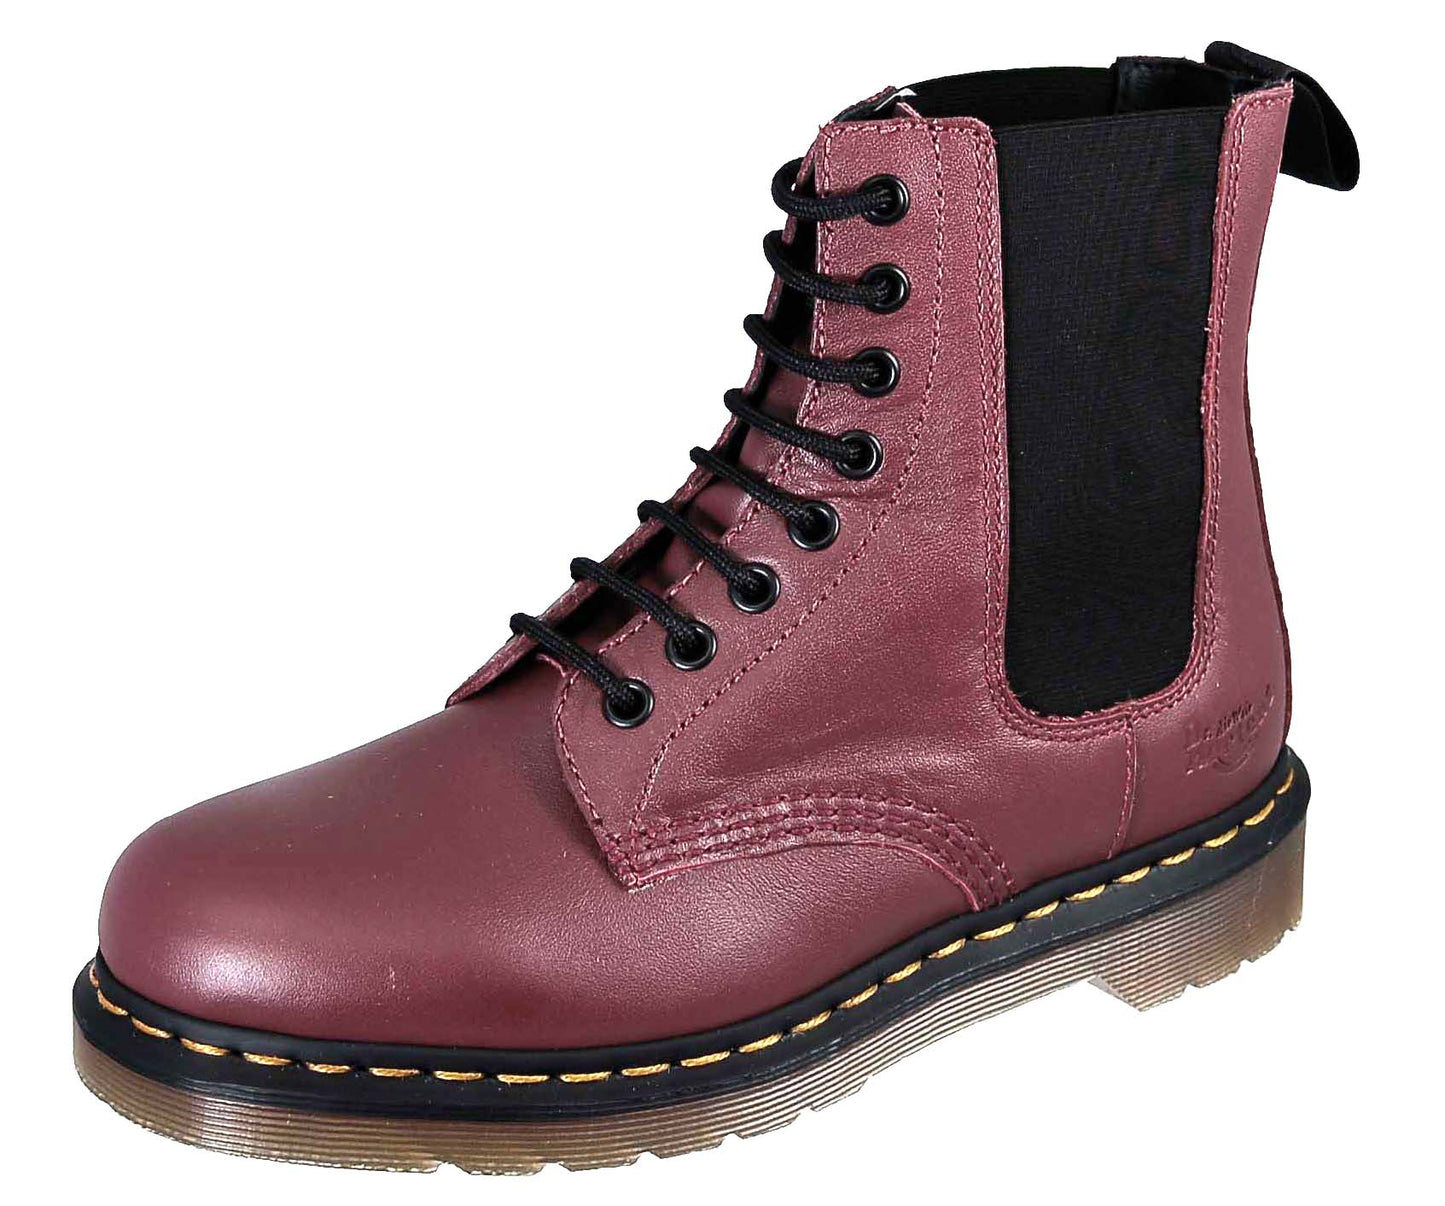 HARPER CHERRY RED SOFTY T BOOT